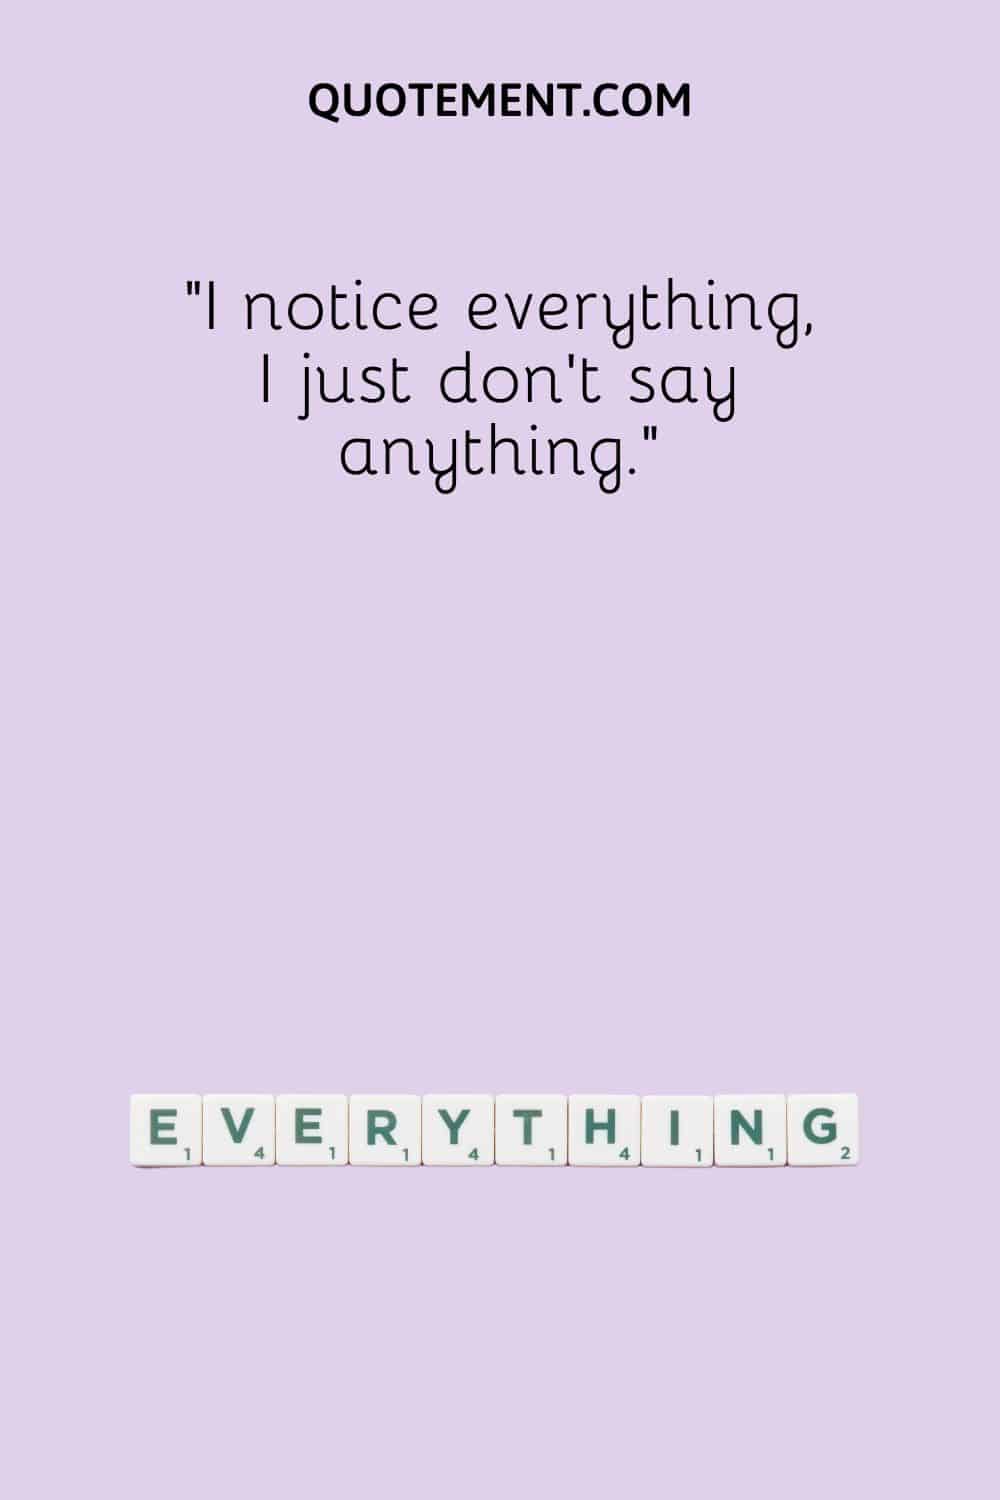 I notice everything, I just don’t say anything